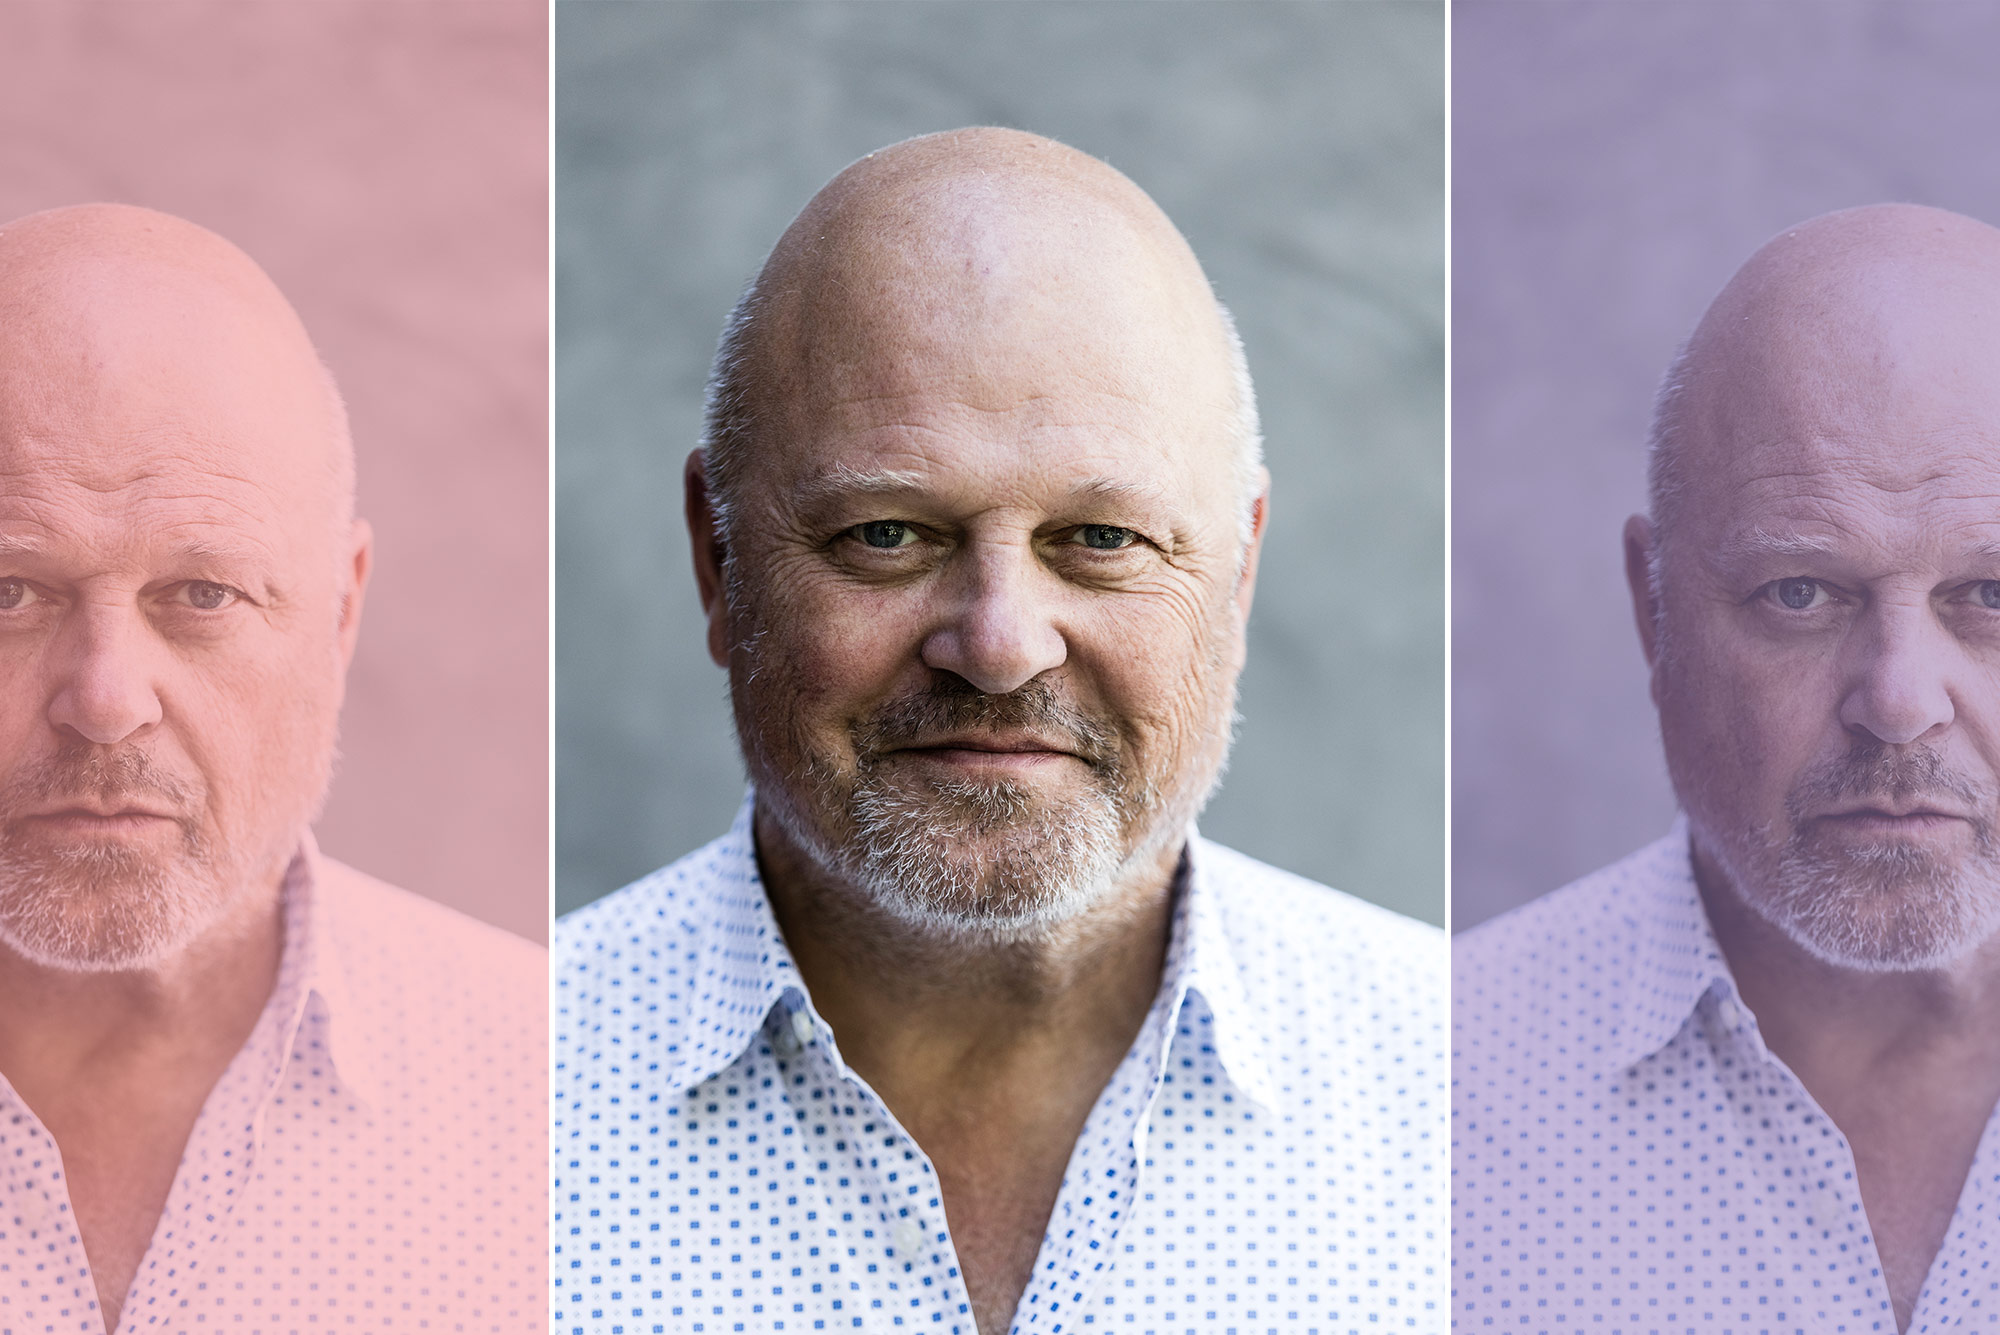 Composite image of three headshots of actor Michael Chiklis (’85), the center photo shows him smiling in a white button down with blue dots. The flanking photos show him more serious and have muted color overlays.